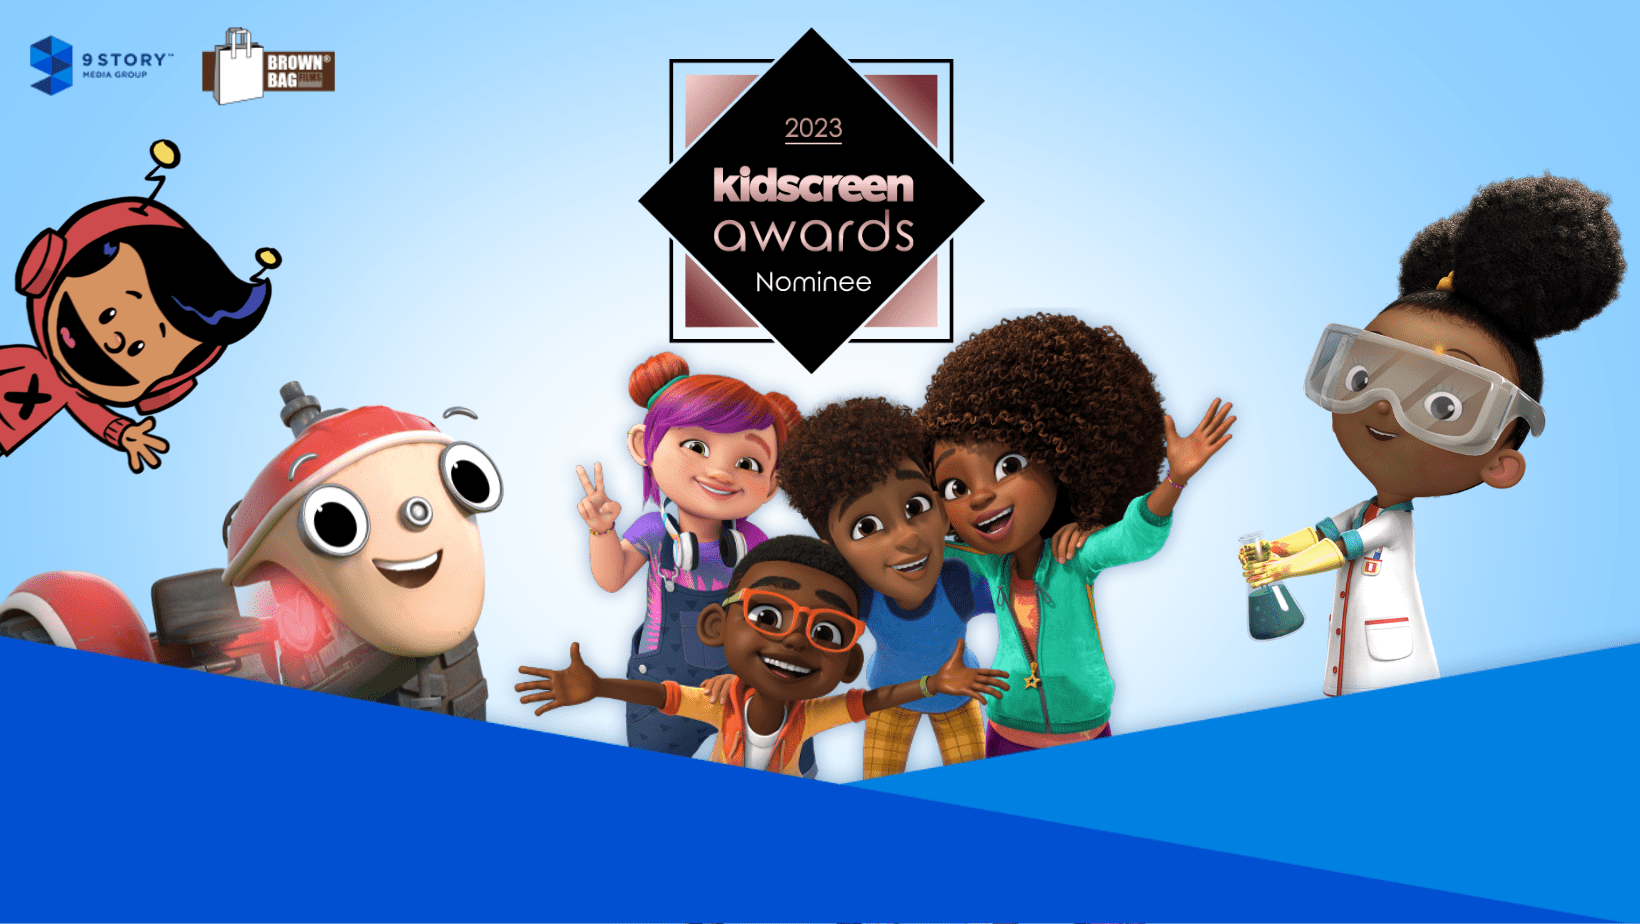 Kidscreen » Archive » 9 Story to distribute 230 hours of Scholastic content